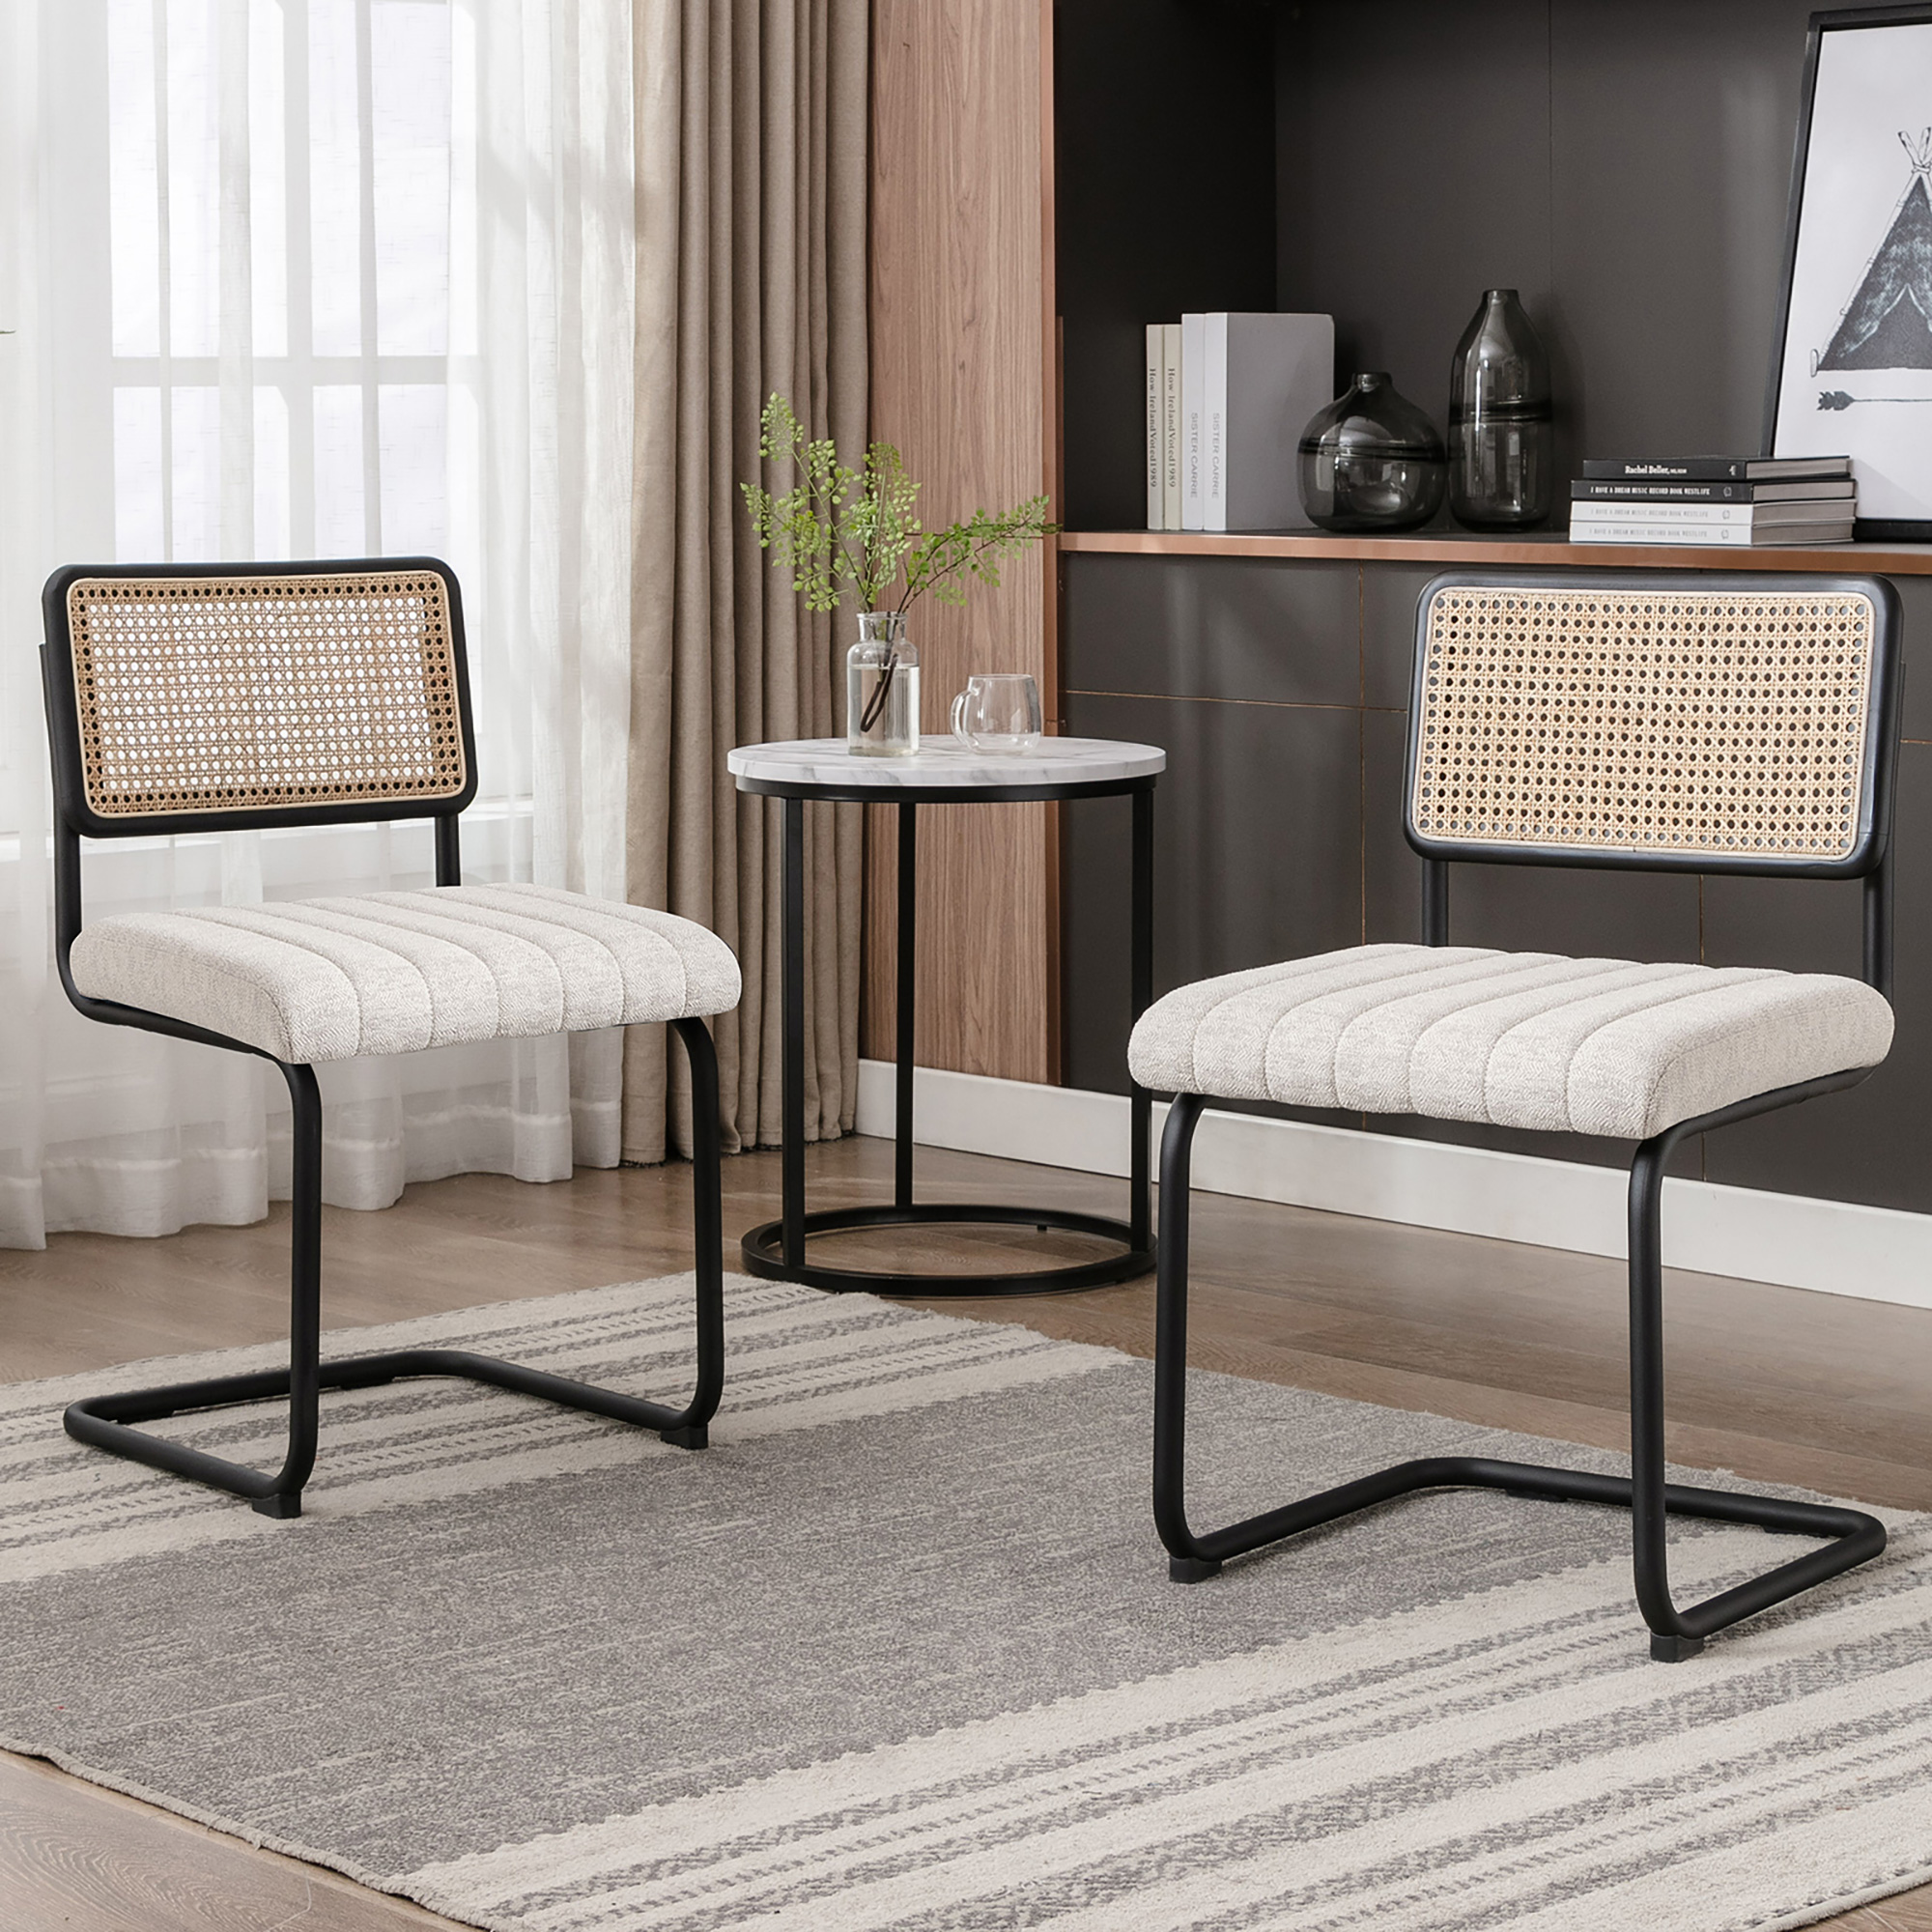 Zesthouse Beige Linen Dining Chairs Set of 2, Rattan Upholstered Kitchen Chairs with Cane Back and Black Metal Legs, Mid-Century Modern Side Chair for Dining Living Room - image 1 of 13